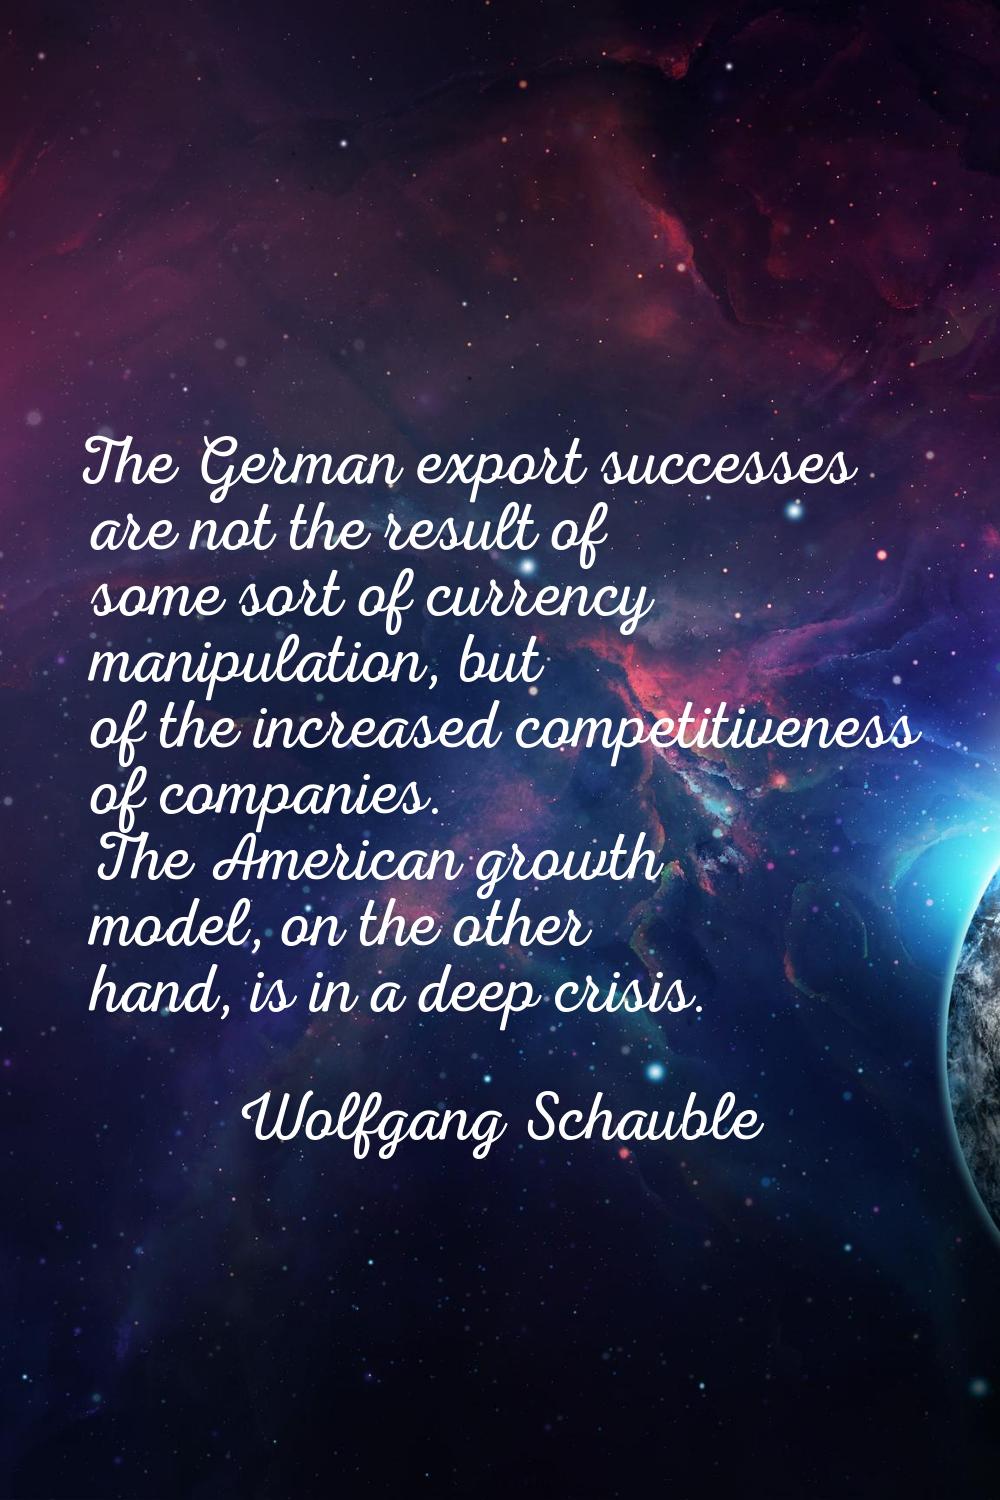 The German export successes are not the result of some sort of currency manipulation, but of the in